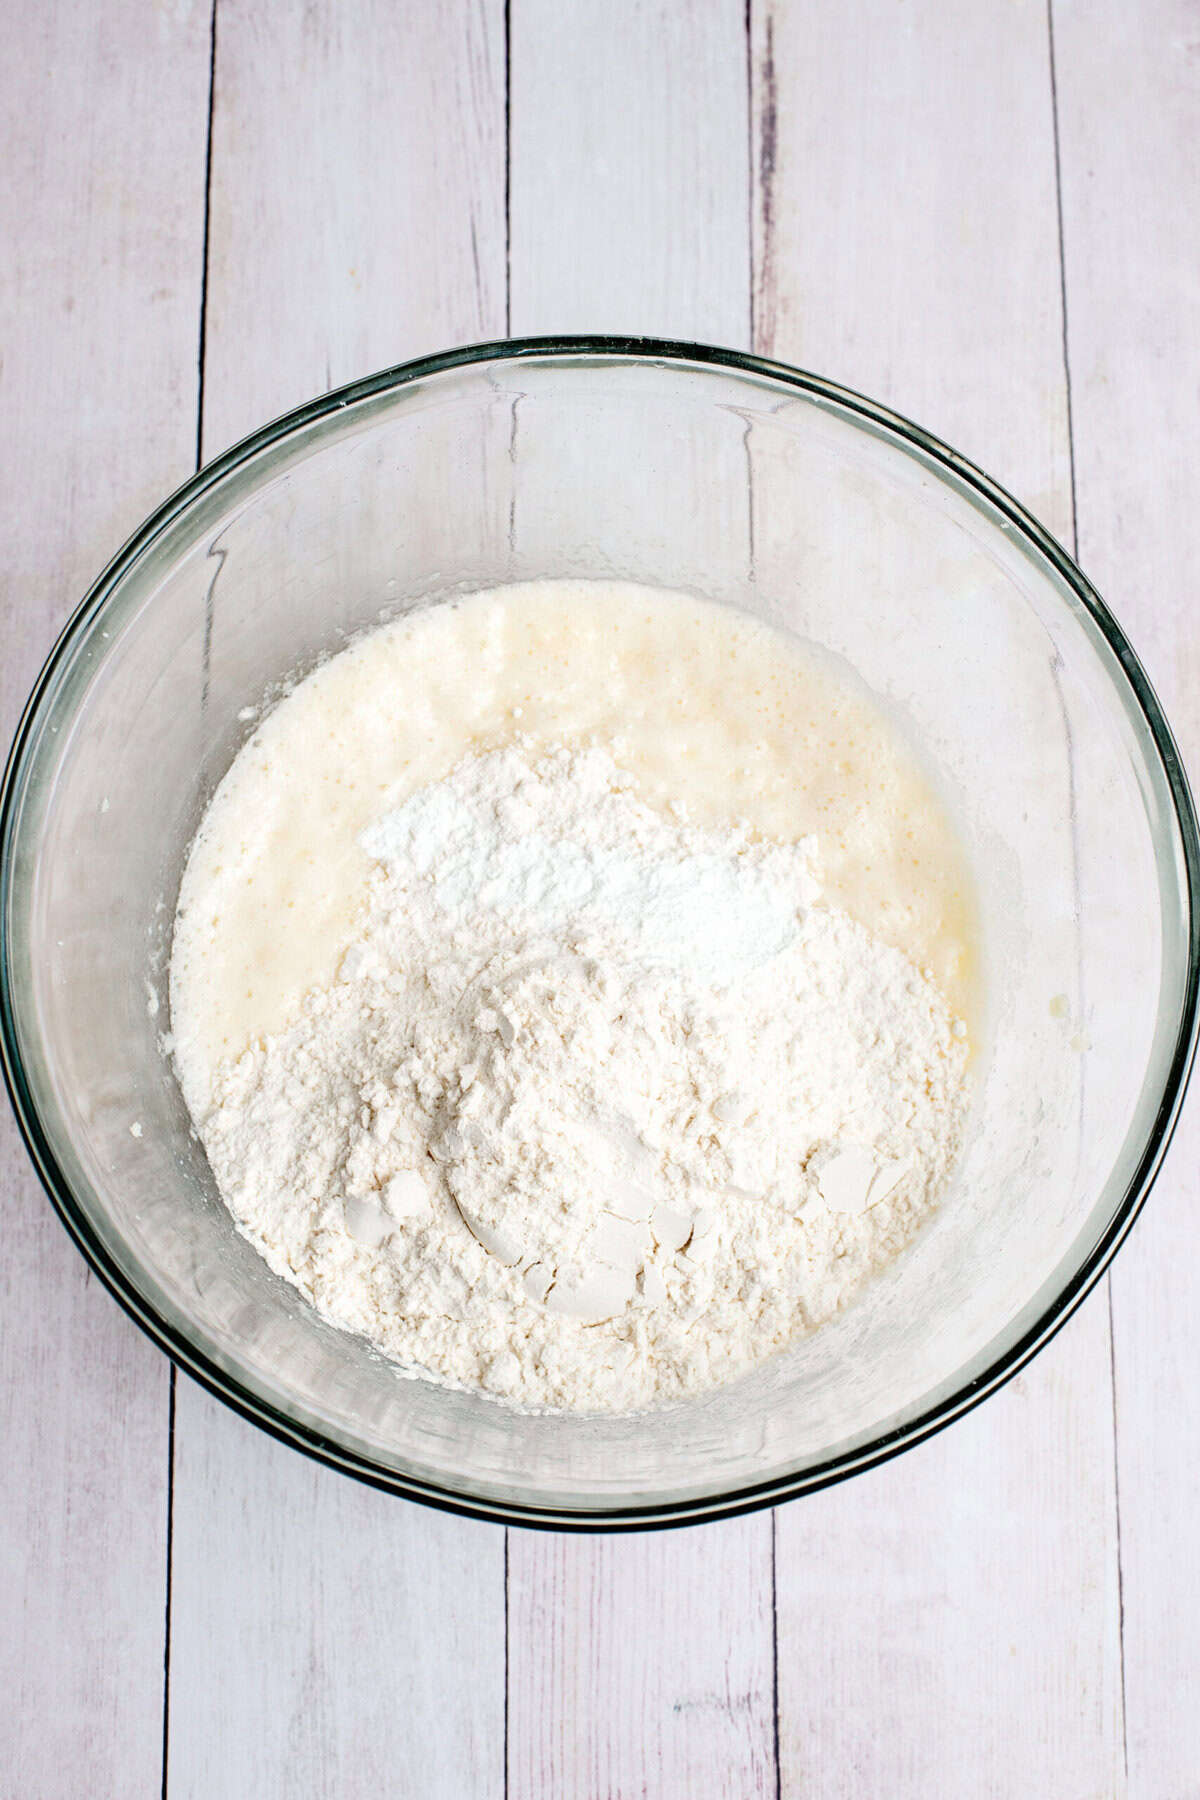 mix in flour and baking soda